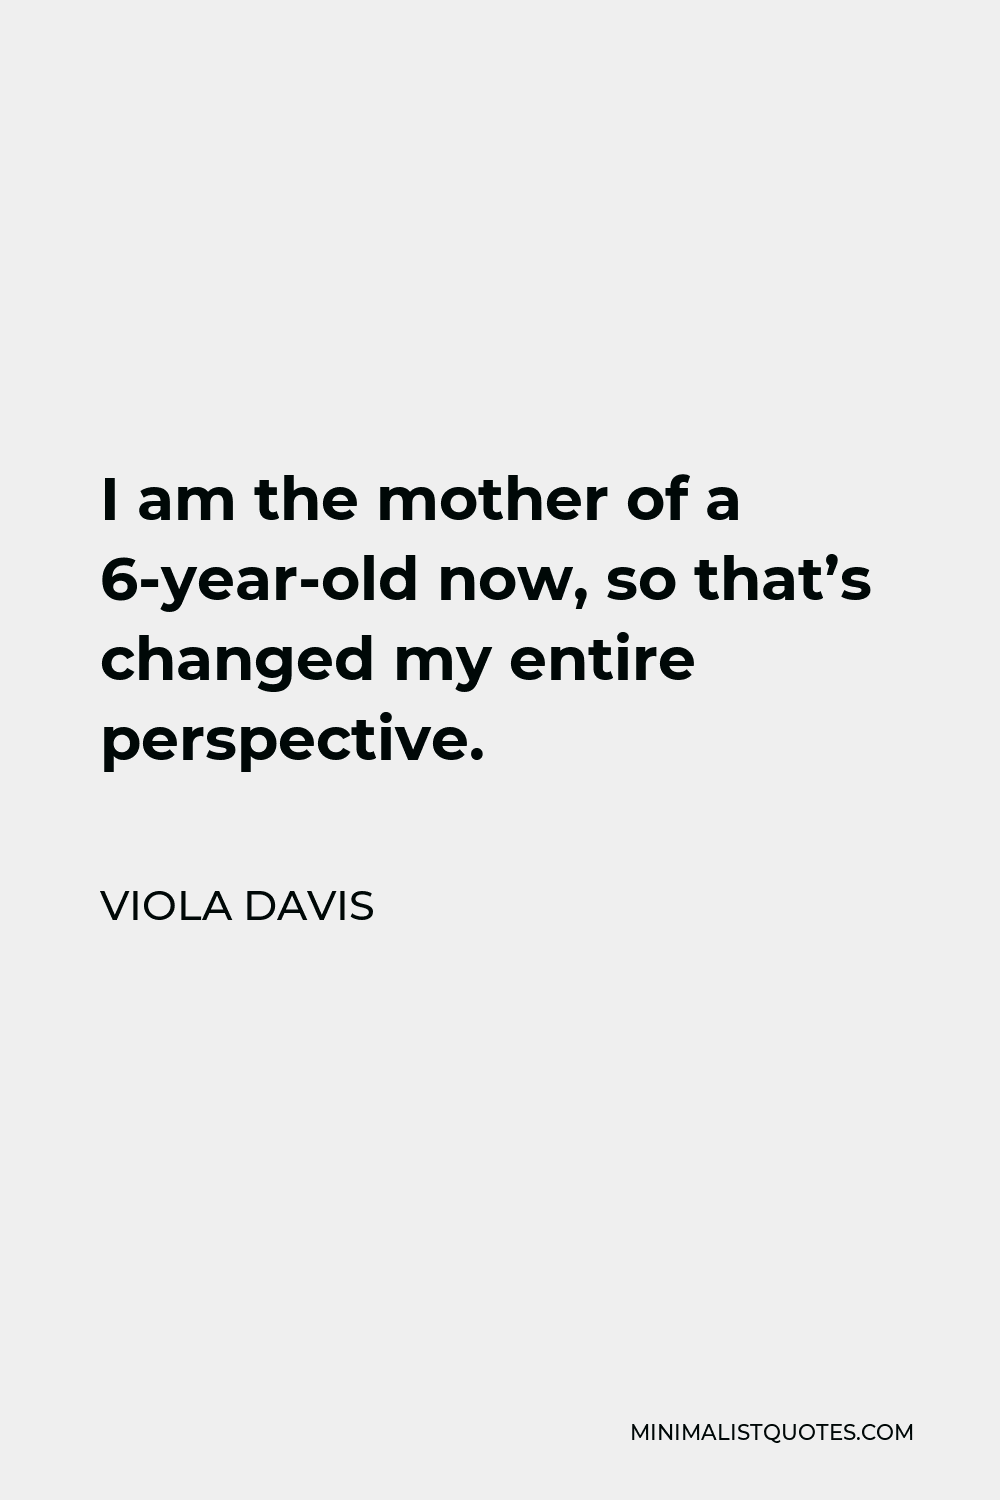 Viola Davis Quote - I am the mother of a 6-year-old now, so that’s changed my entire perspective.